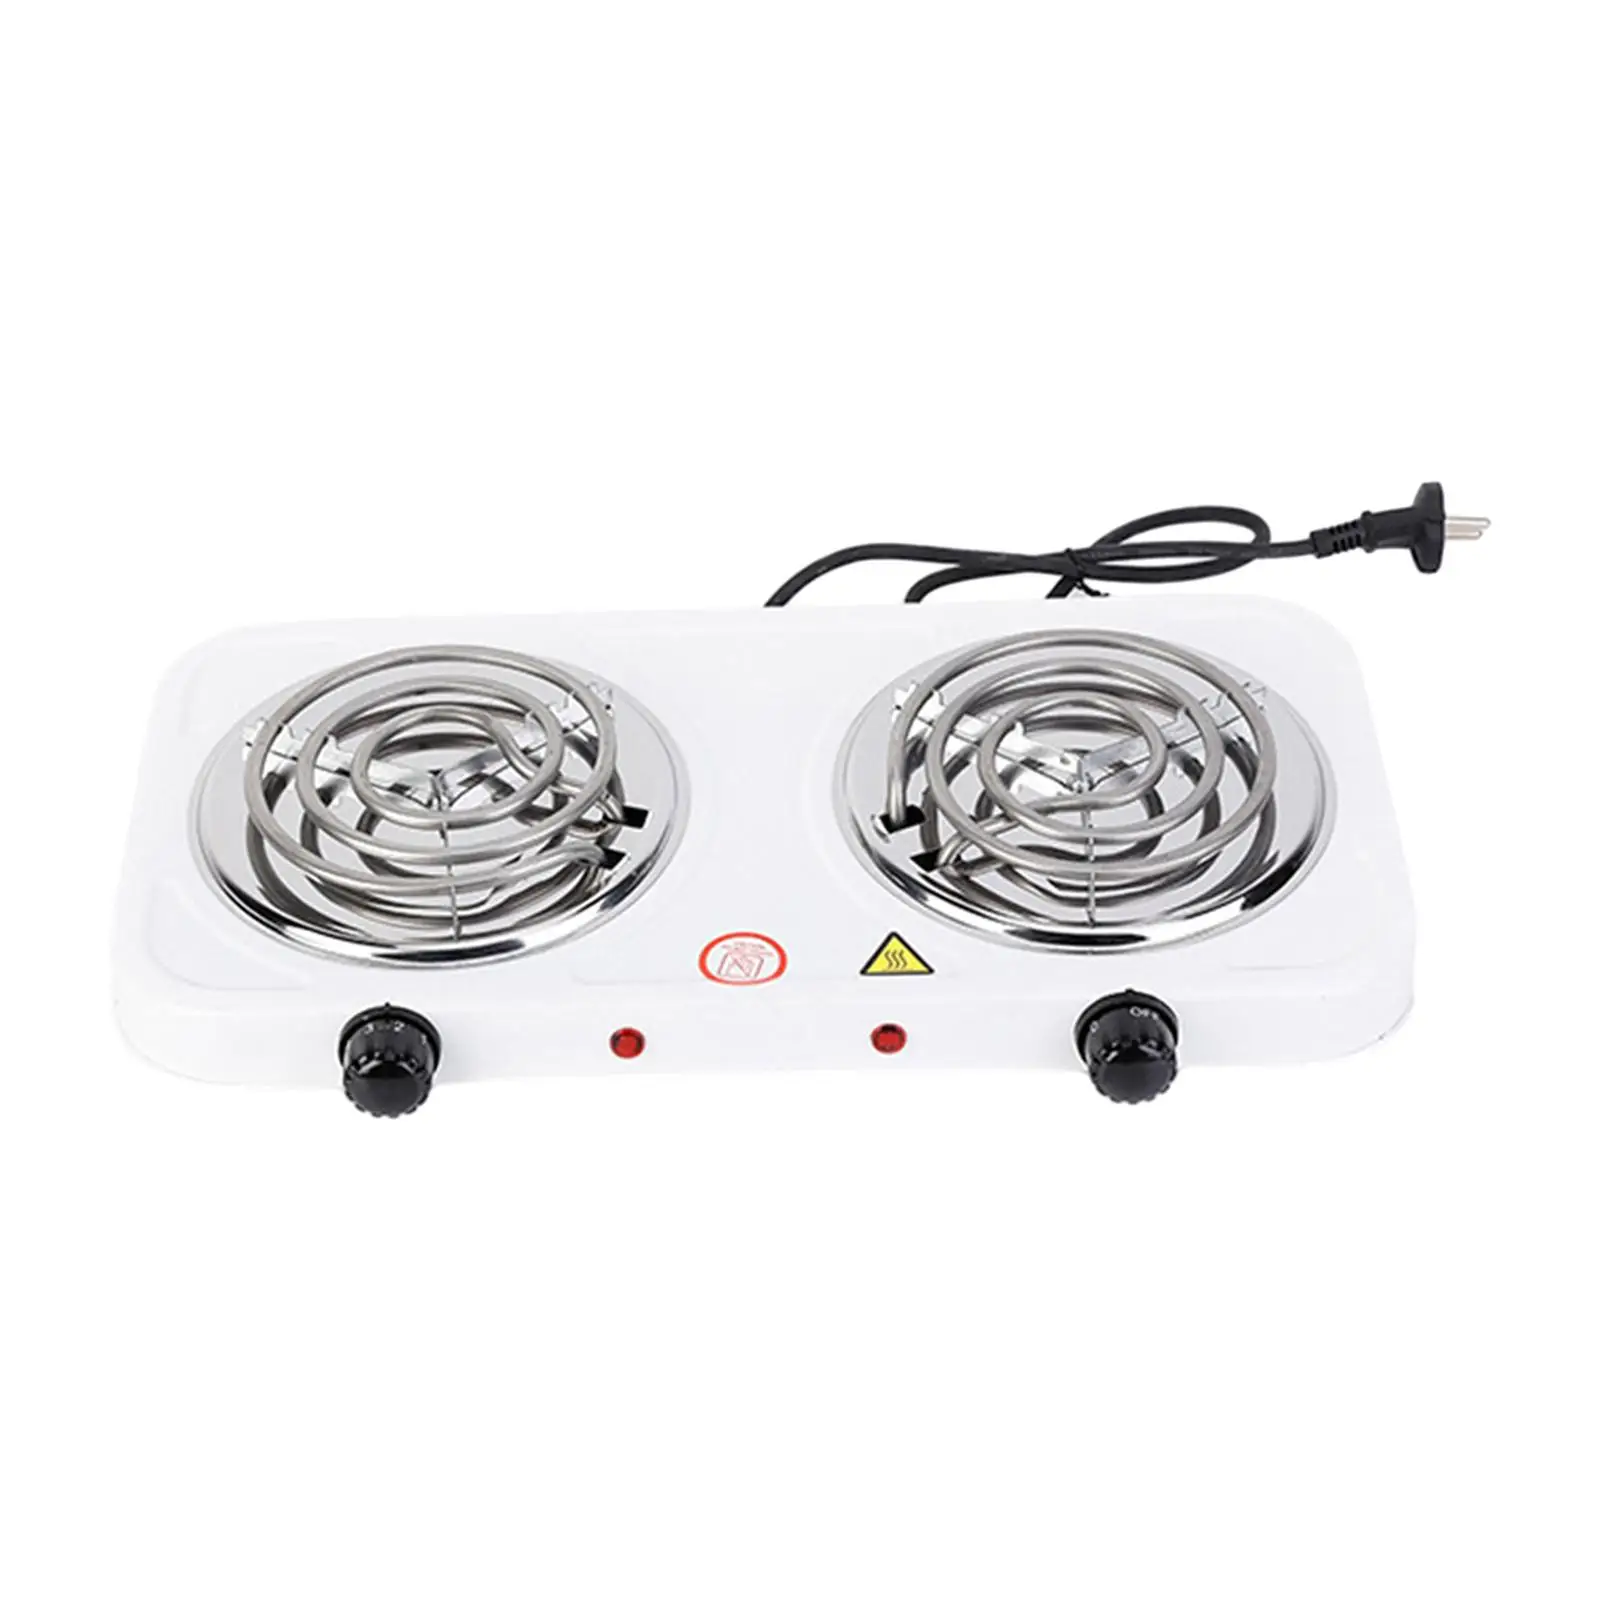 Electric Double Burner with 5 Level Temperature Control for Home, Travel, Camping, Outdoor Activities Practical Electric Cooktop